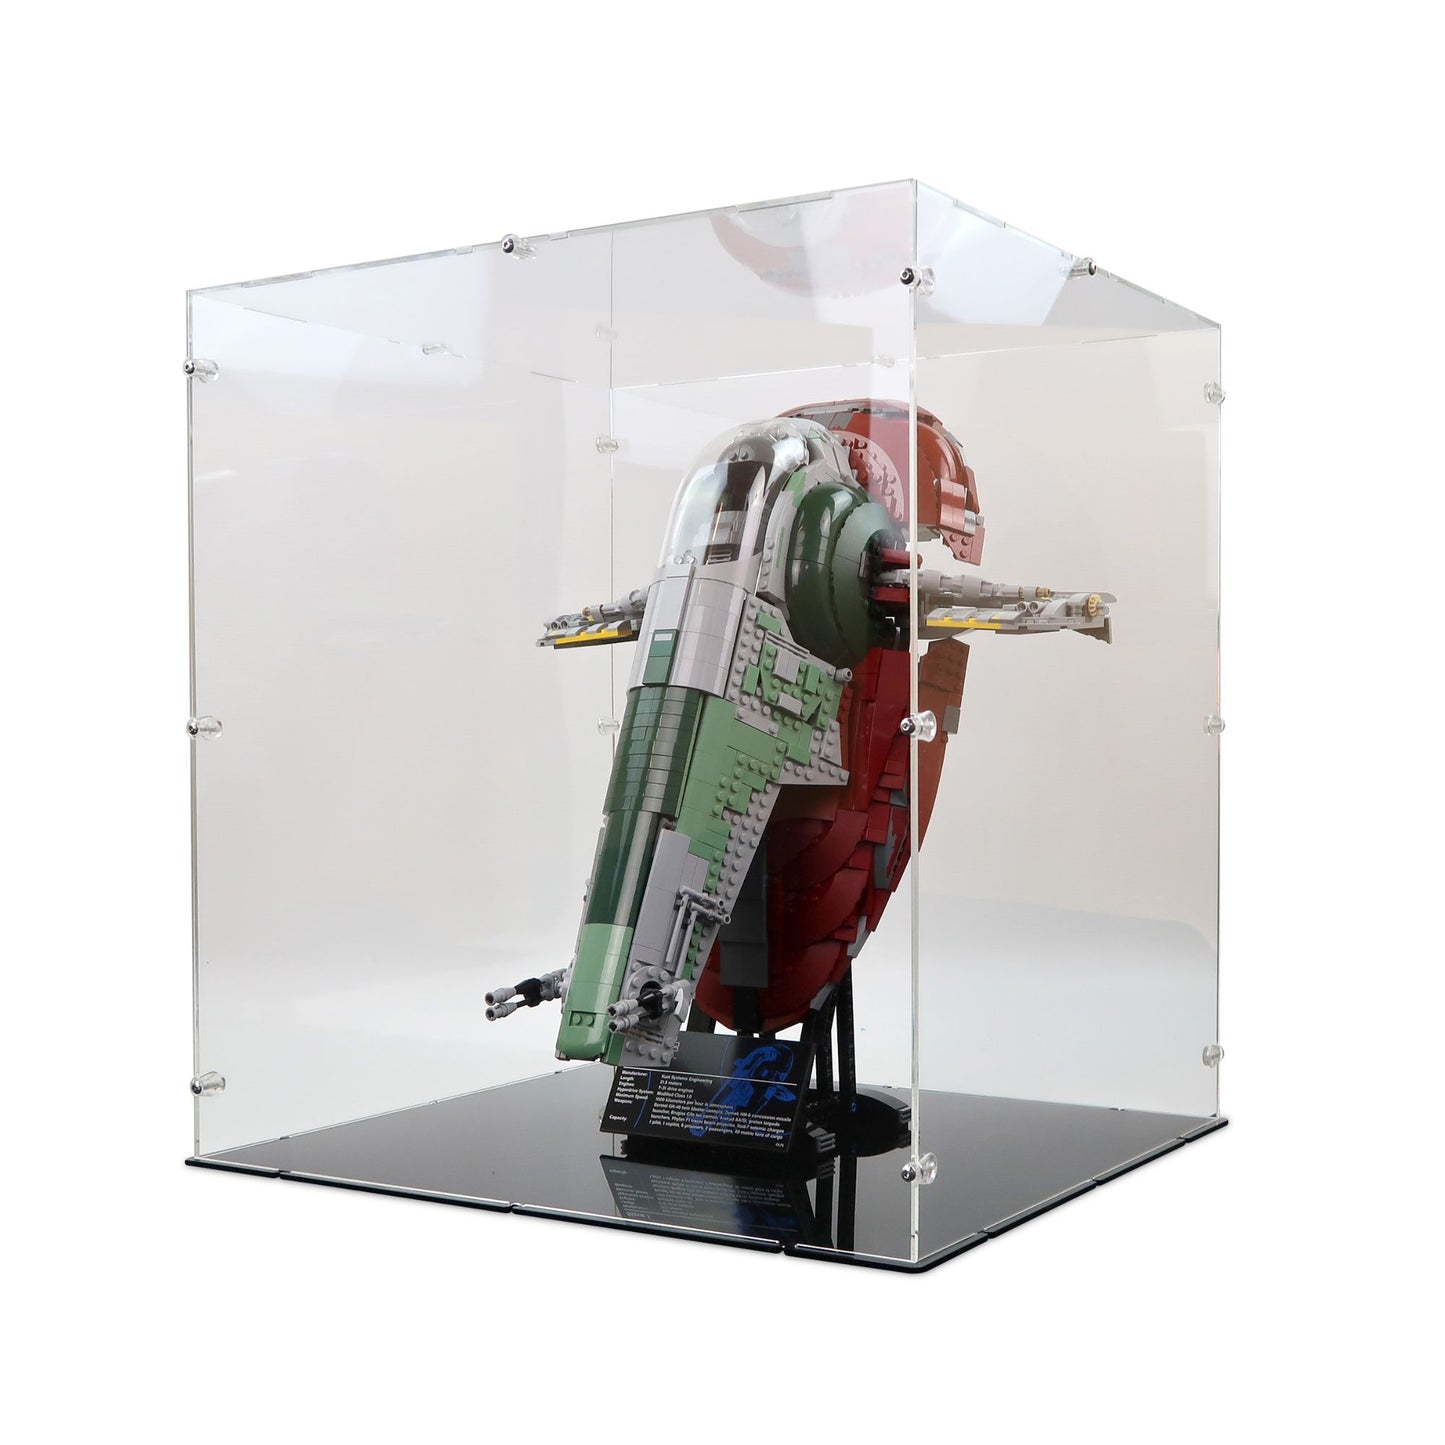 75060 UCS Slave 1 Display Case (On Stand)